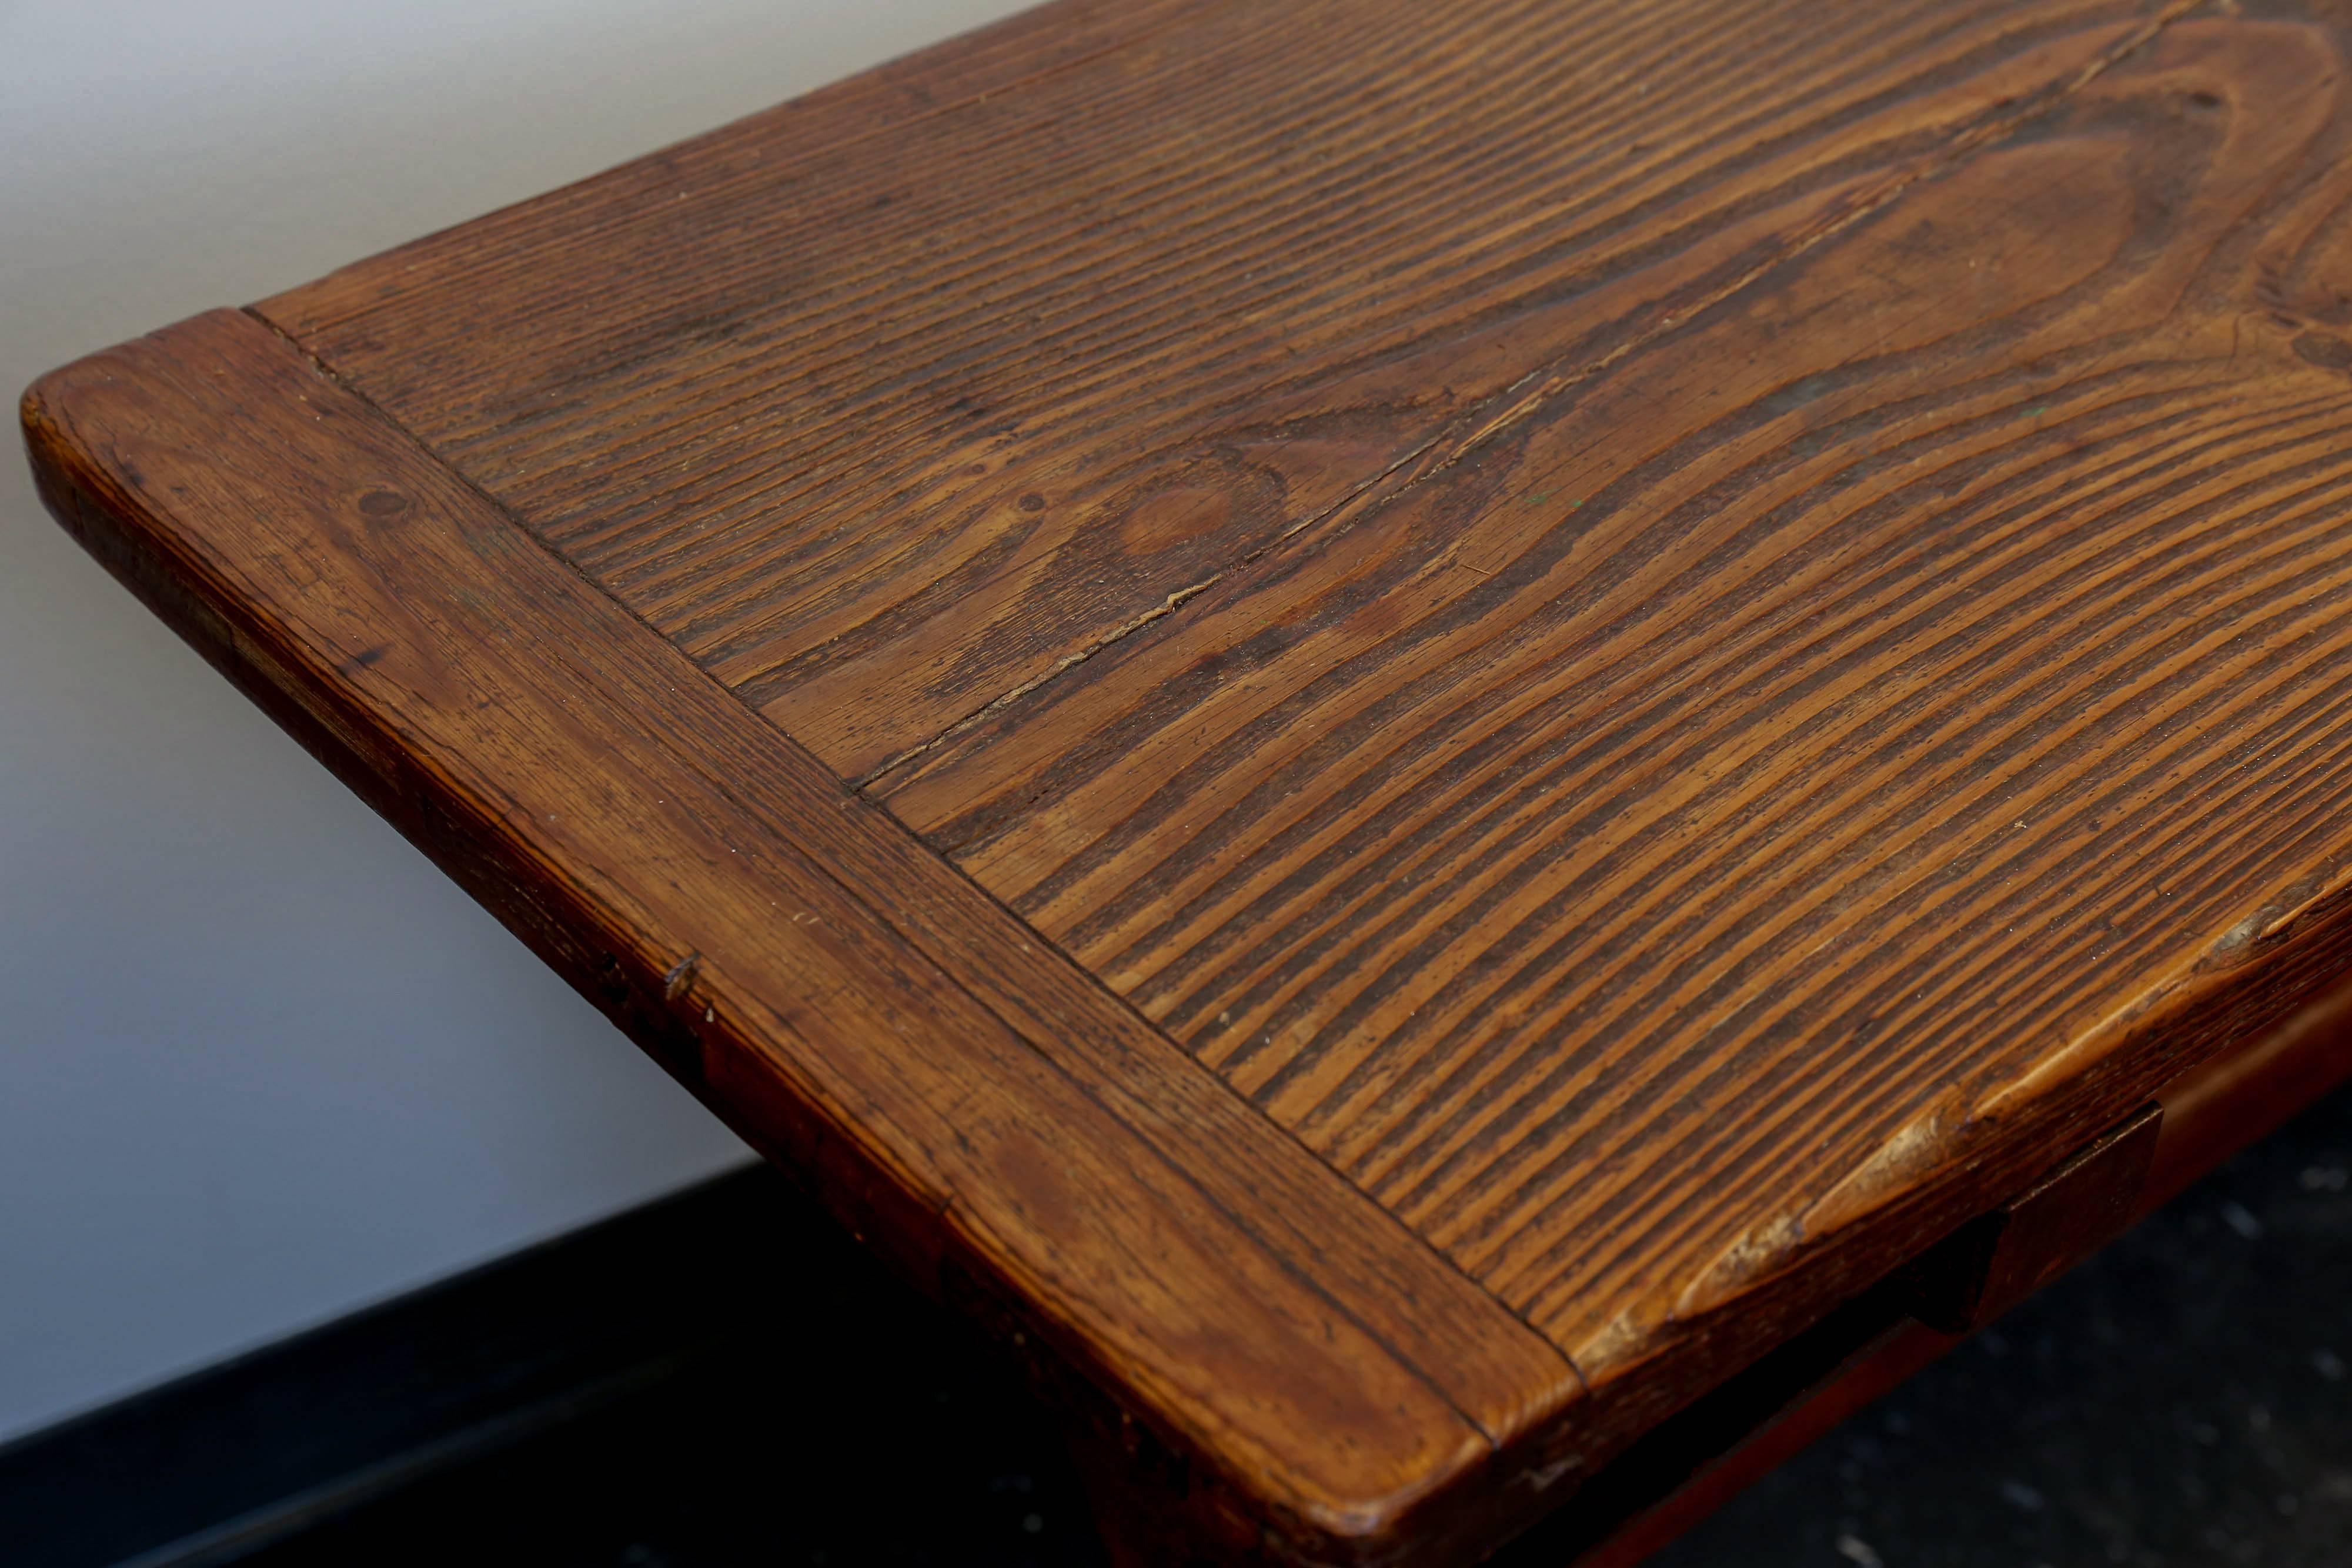 19th century English tavern table with a single plank top. Trestle base and breadboard detail on top. Grain has popped and produced a beautiful three dimensional look due to years of cleaning with a lye mixture. Very sturdy.